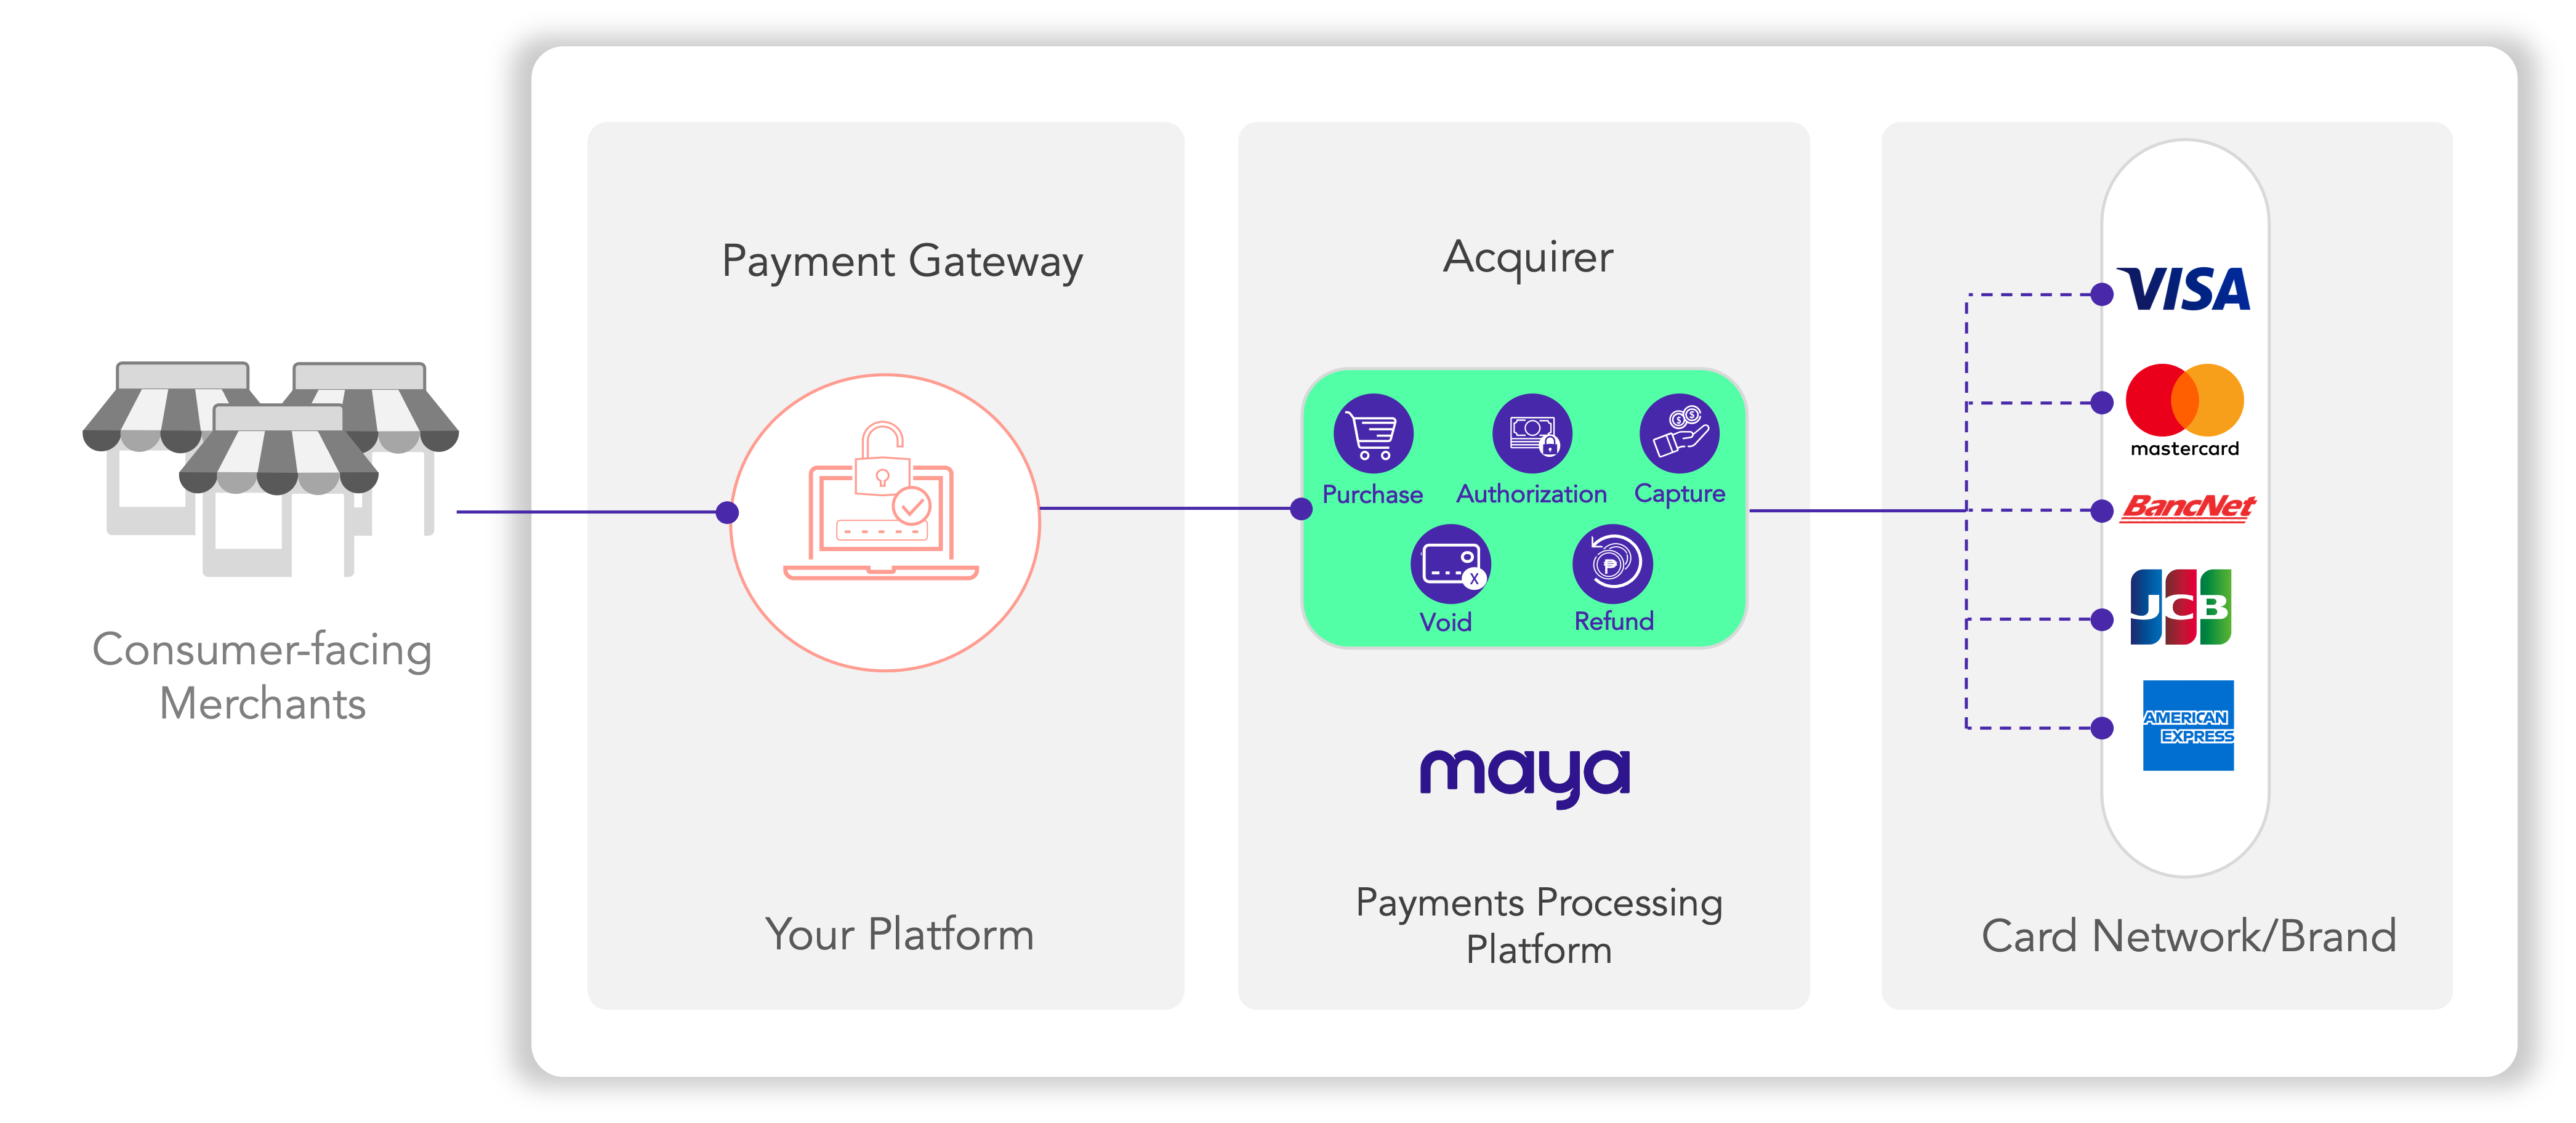 **Note**: Some features would require **testing with Card Scheme for certification**. Note also that you are responsible for **PCI compliance** and you may be required to provide additional documentation and/or their attestation of compliance to Maya.